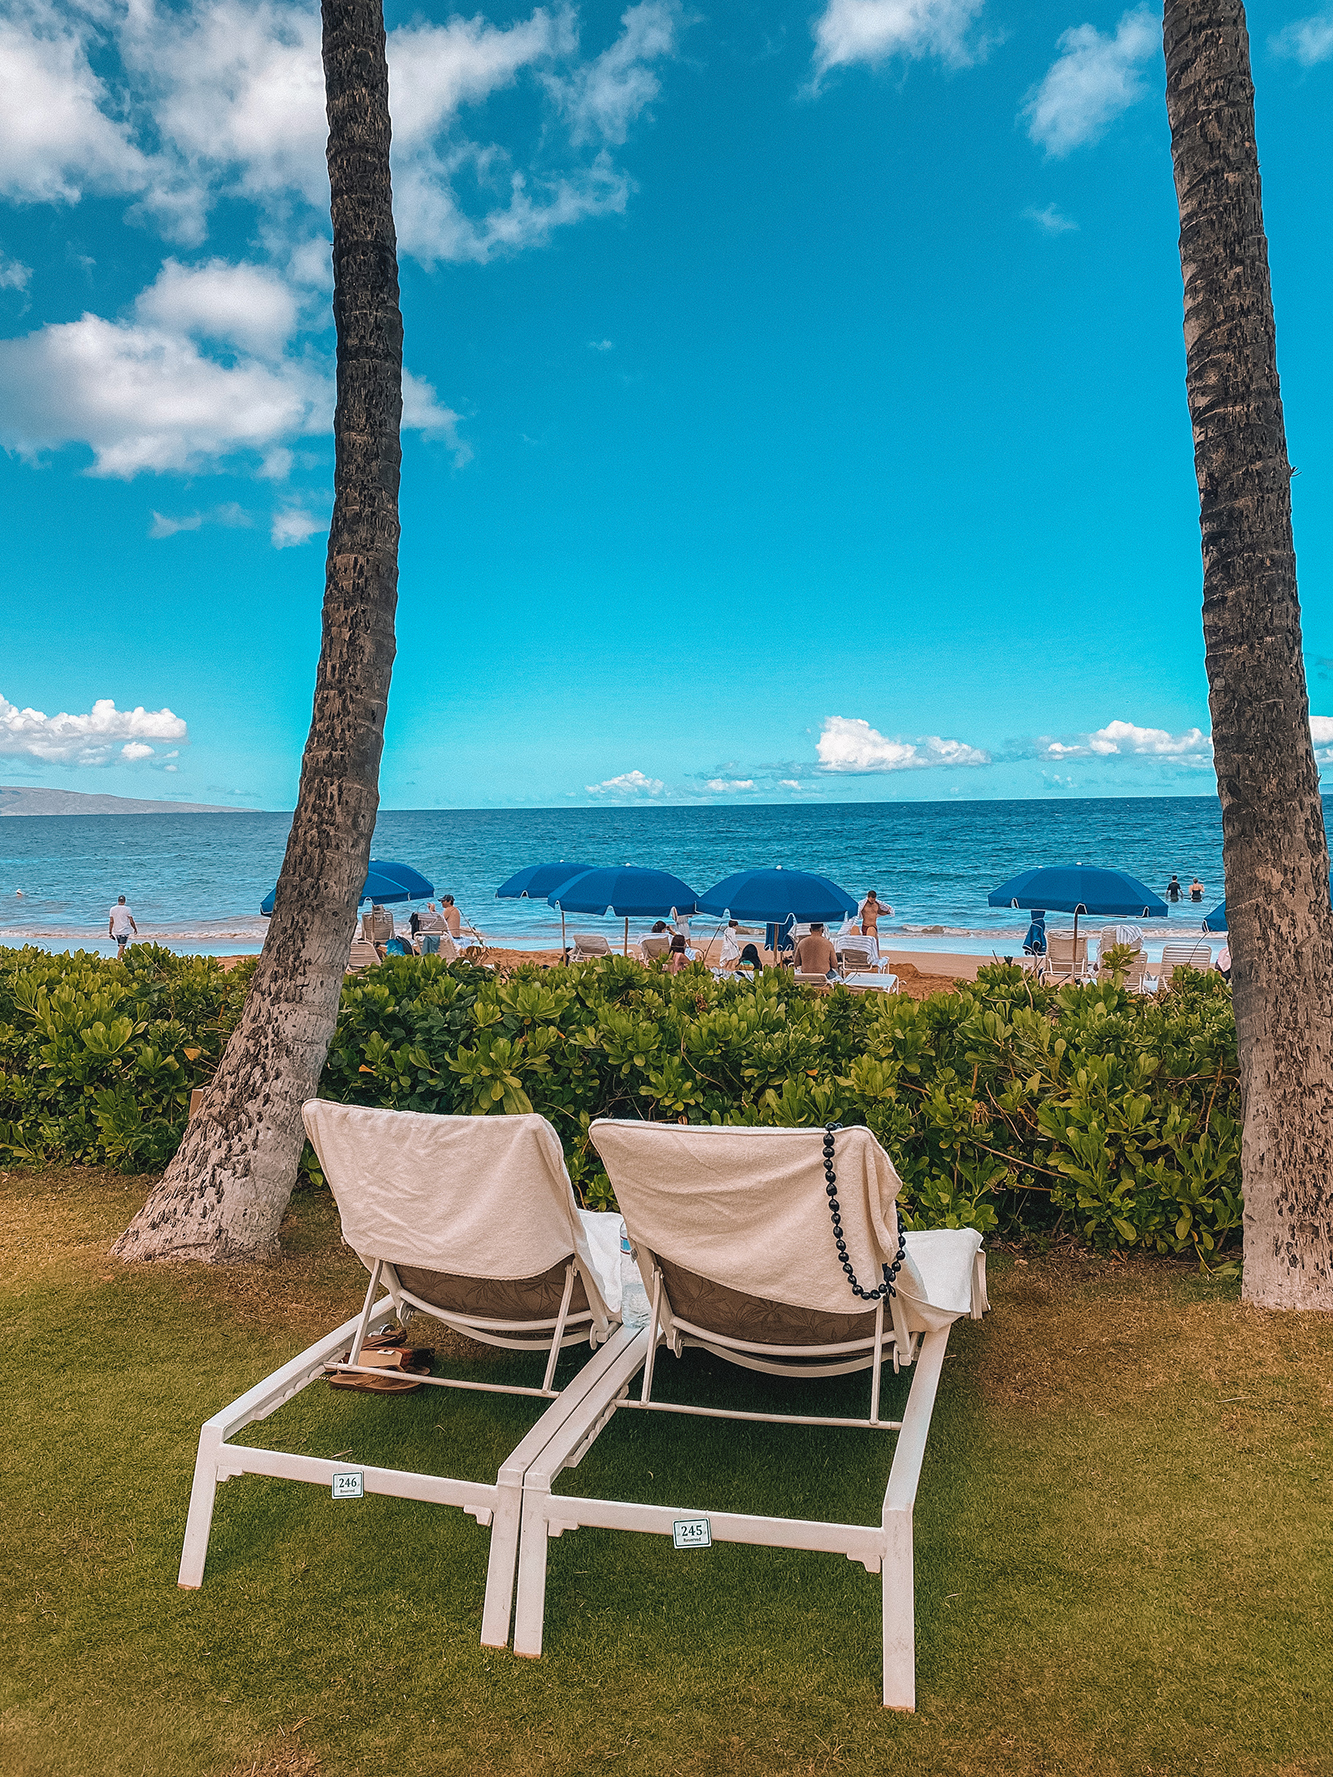 Maui Travel Guide 2021 - Where to stay, eat and play.. plus planning for COVID regulations and restrictions. How to book your maui trip